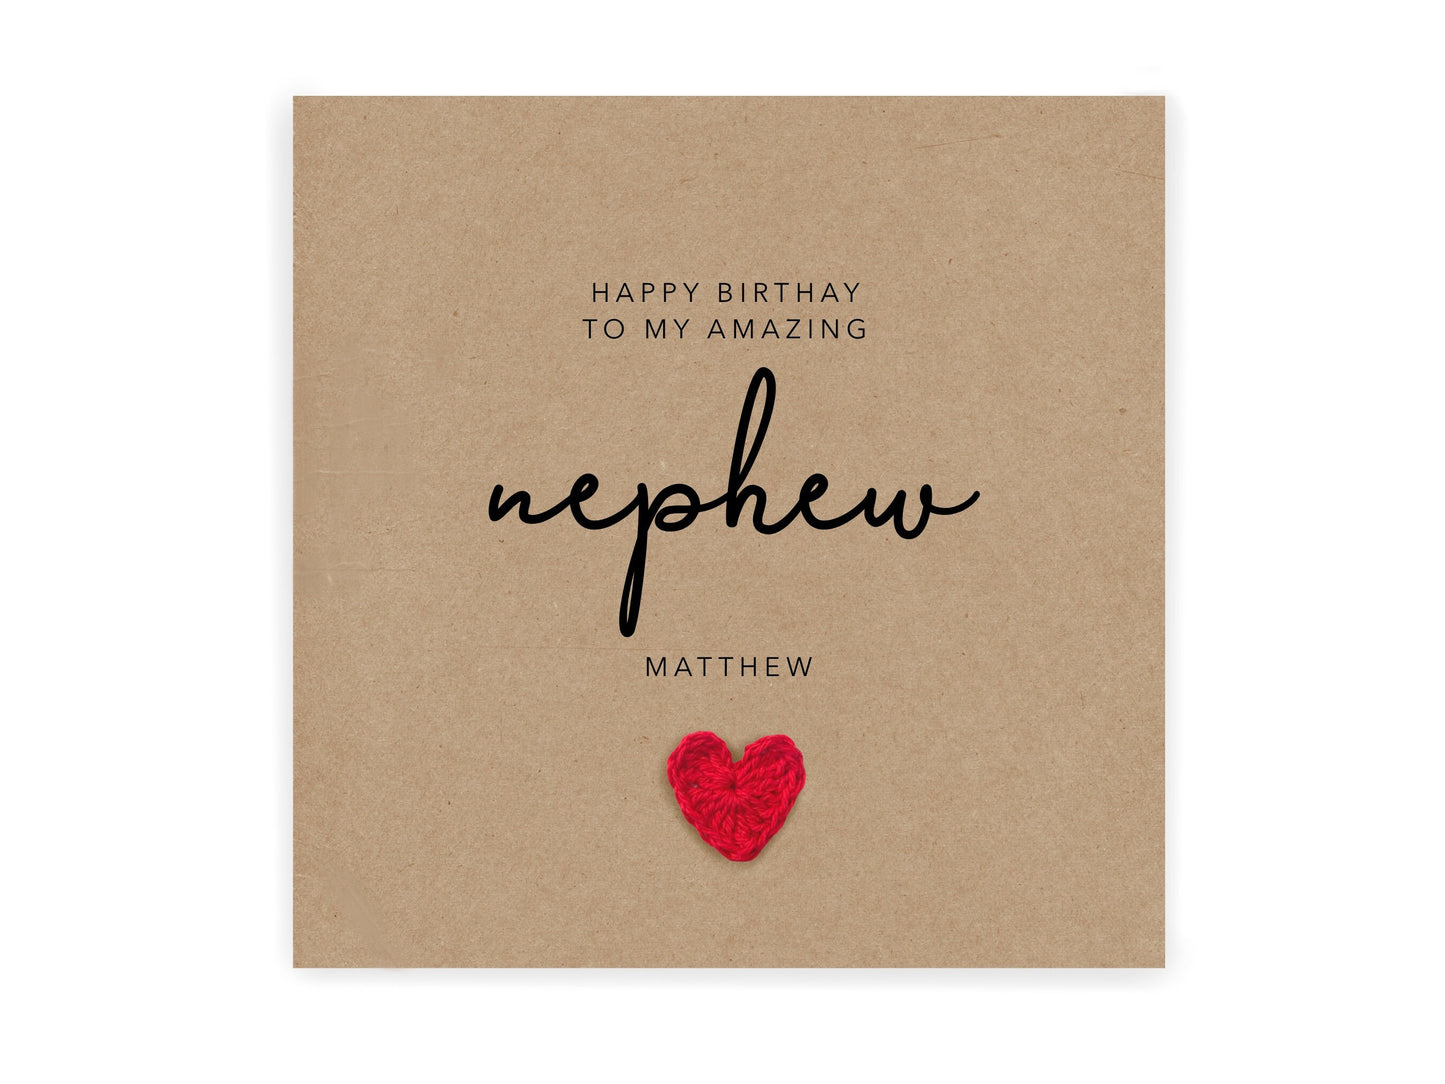 Personalised Nephew Birthday Card, To An Amazing Nephew Happy Birthday, Nephew Card Birthday, For Nephew, From Uncle, From Aunt, Birthday